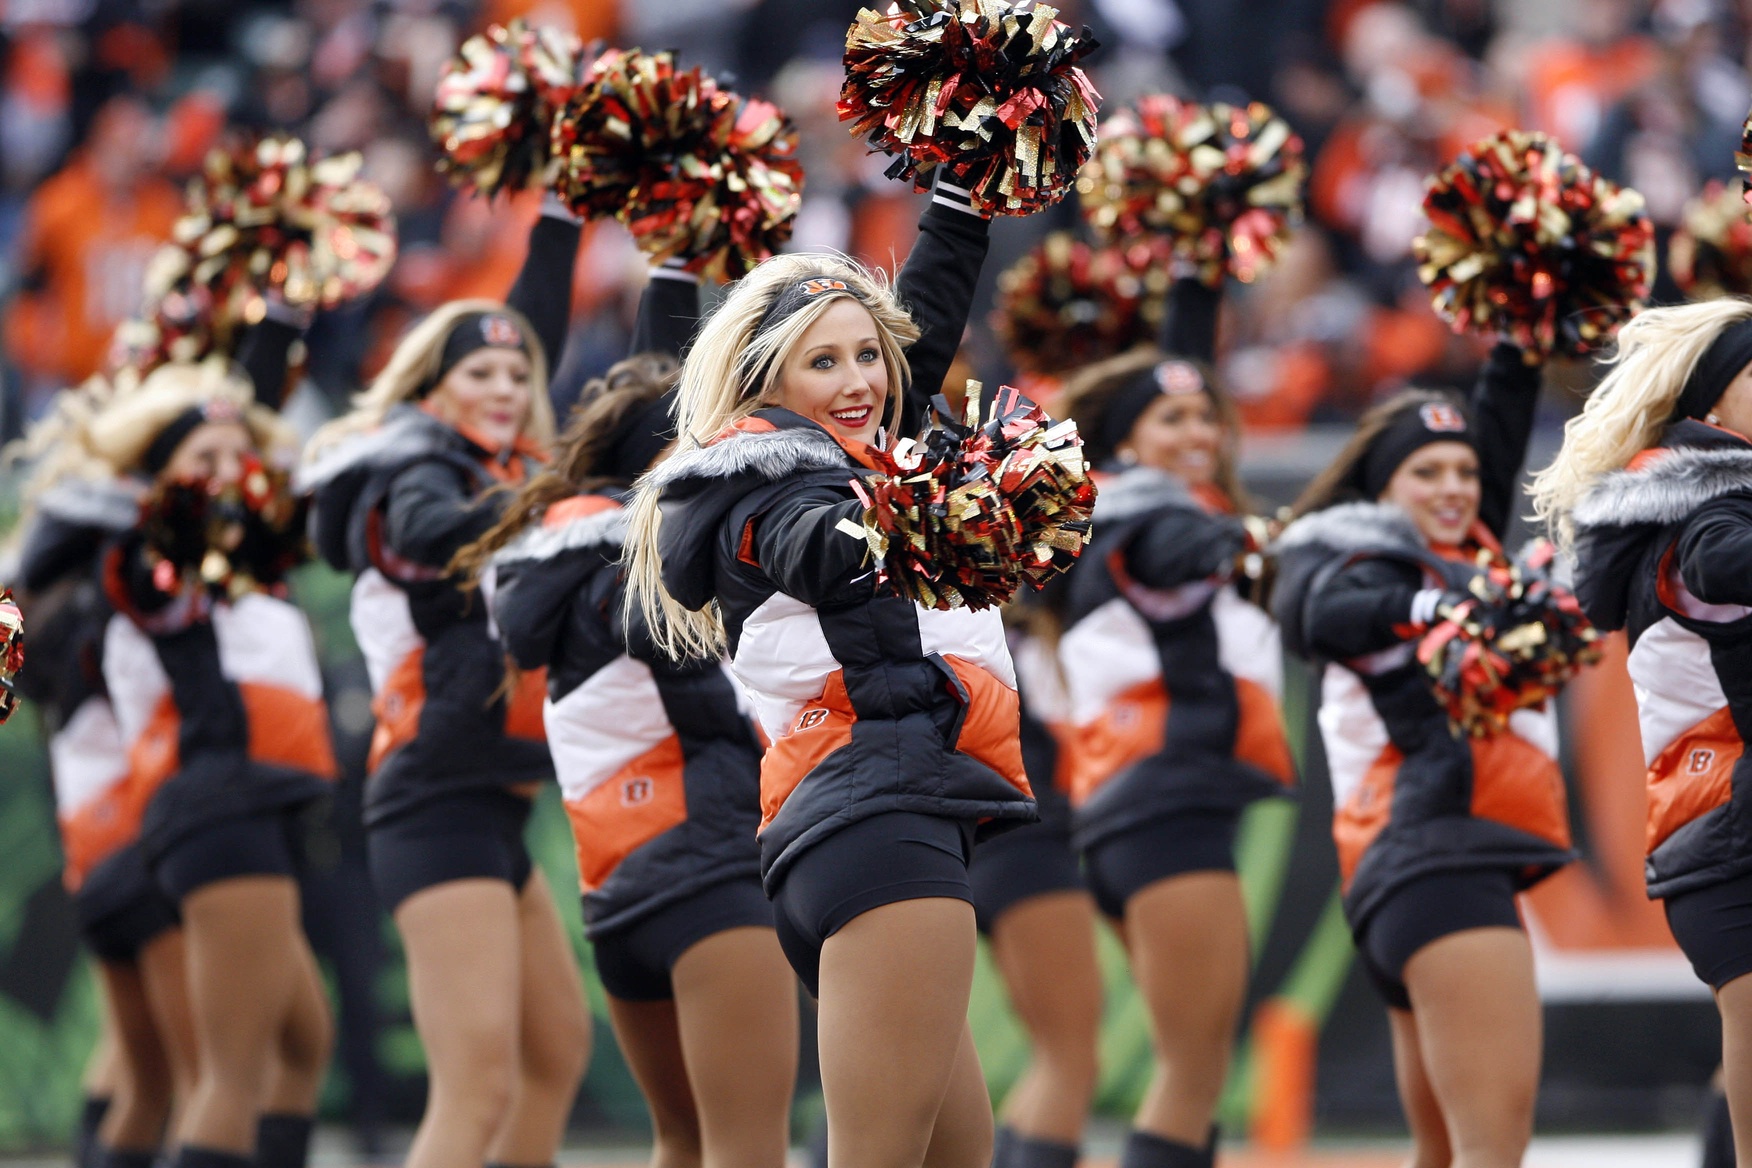 About Those Bengals Cheerleaders. 